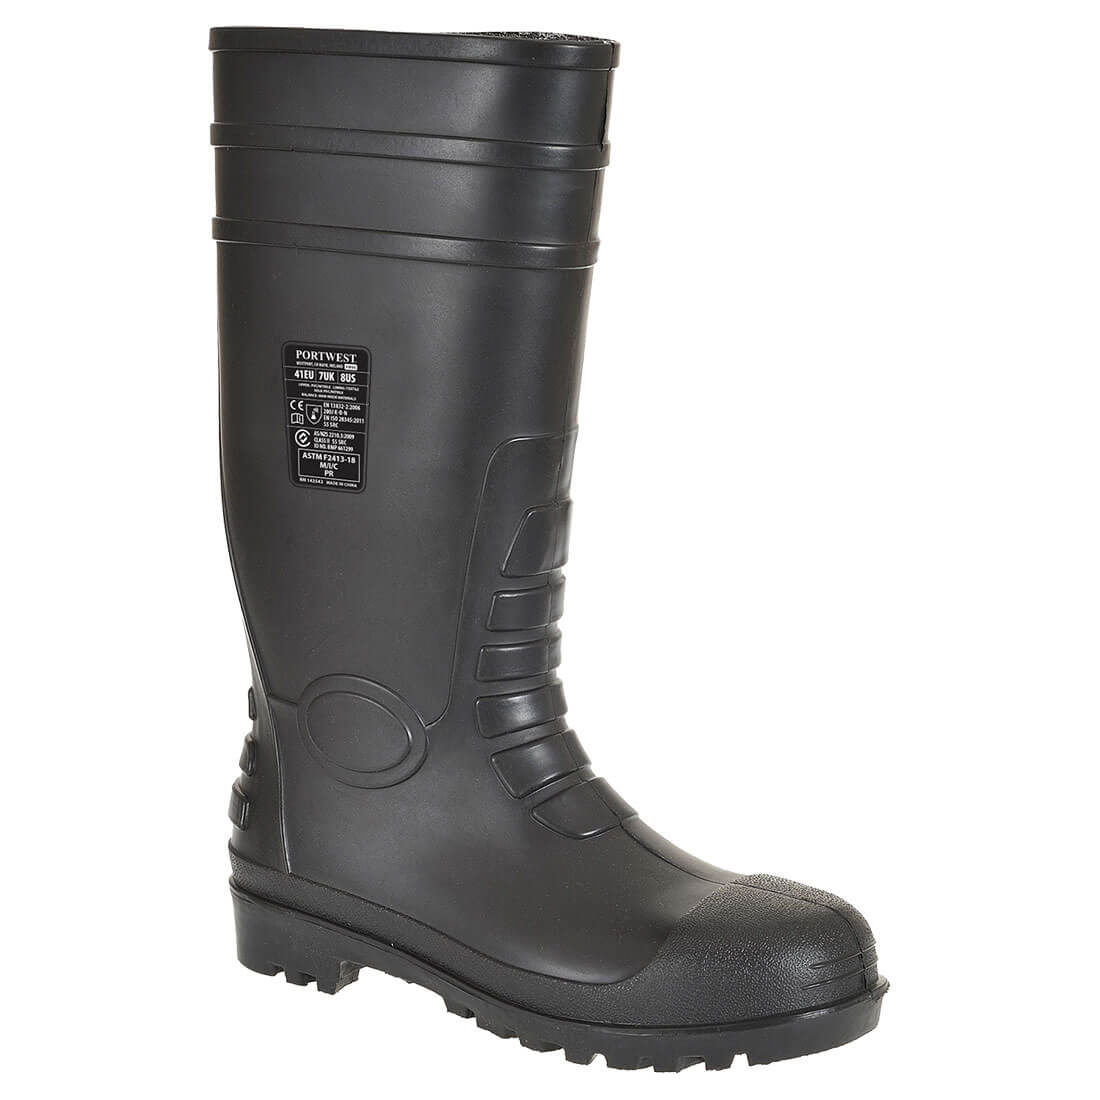 Total Safety Gumboot Black- FW95 Front